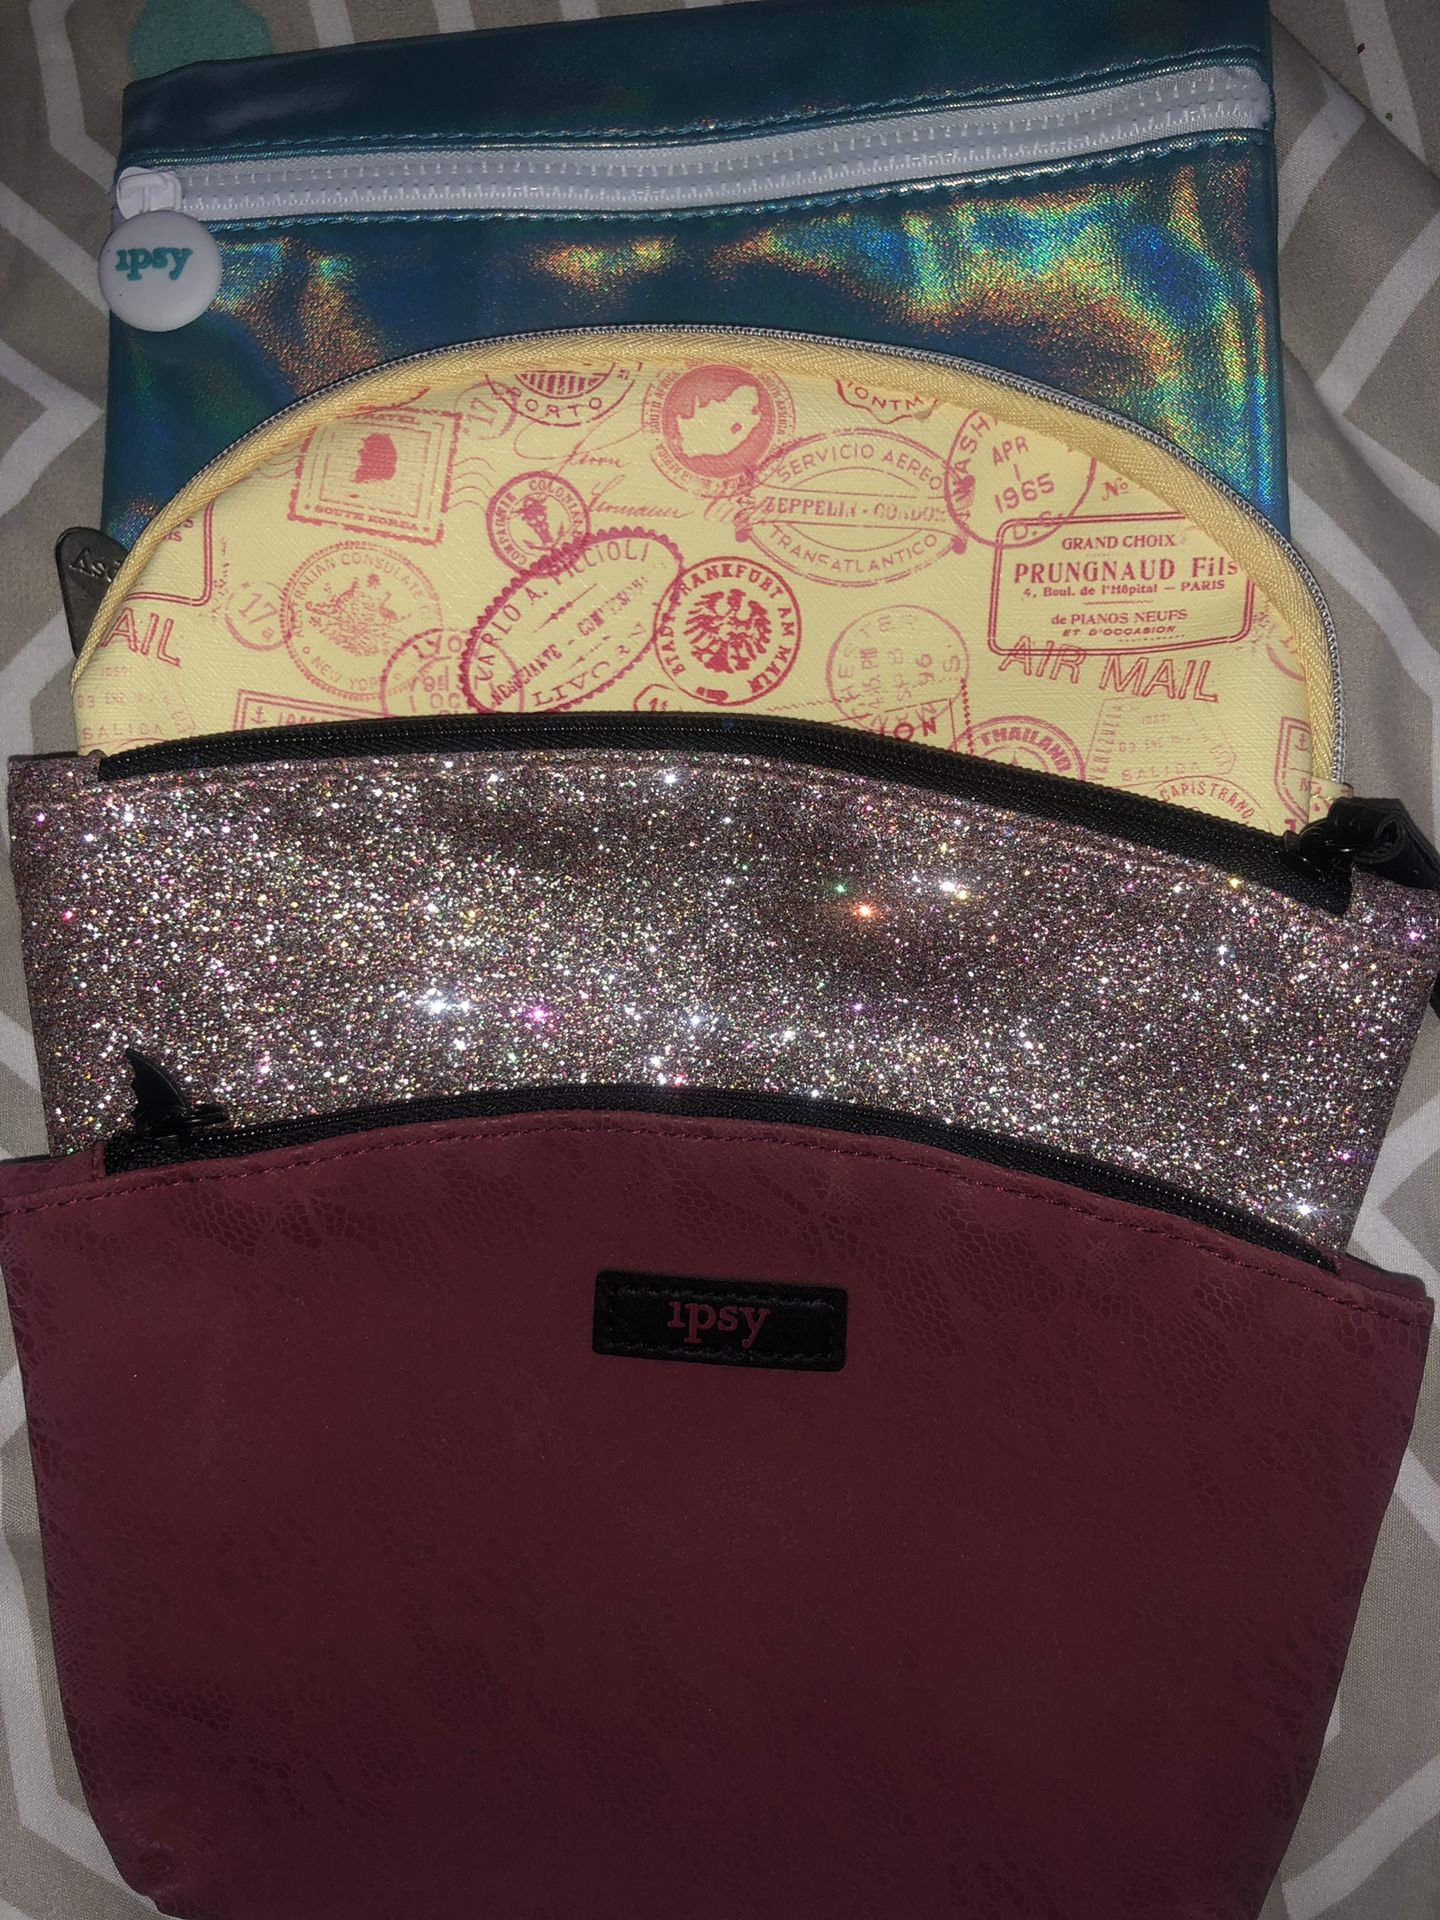 4 Ipsy makeup bags plus free face mask